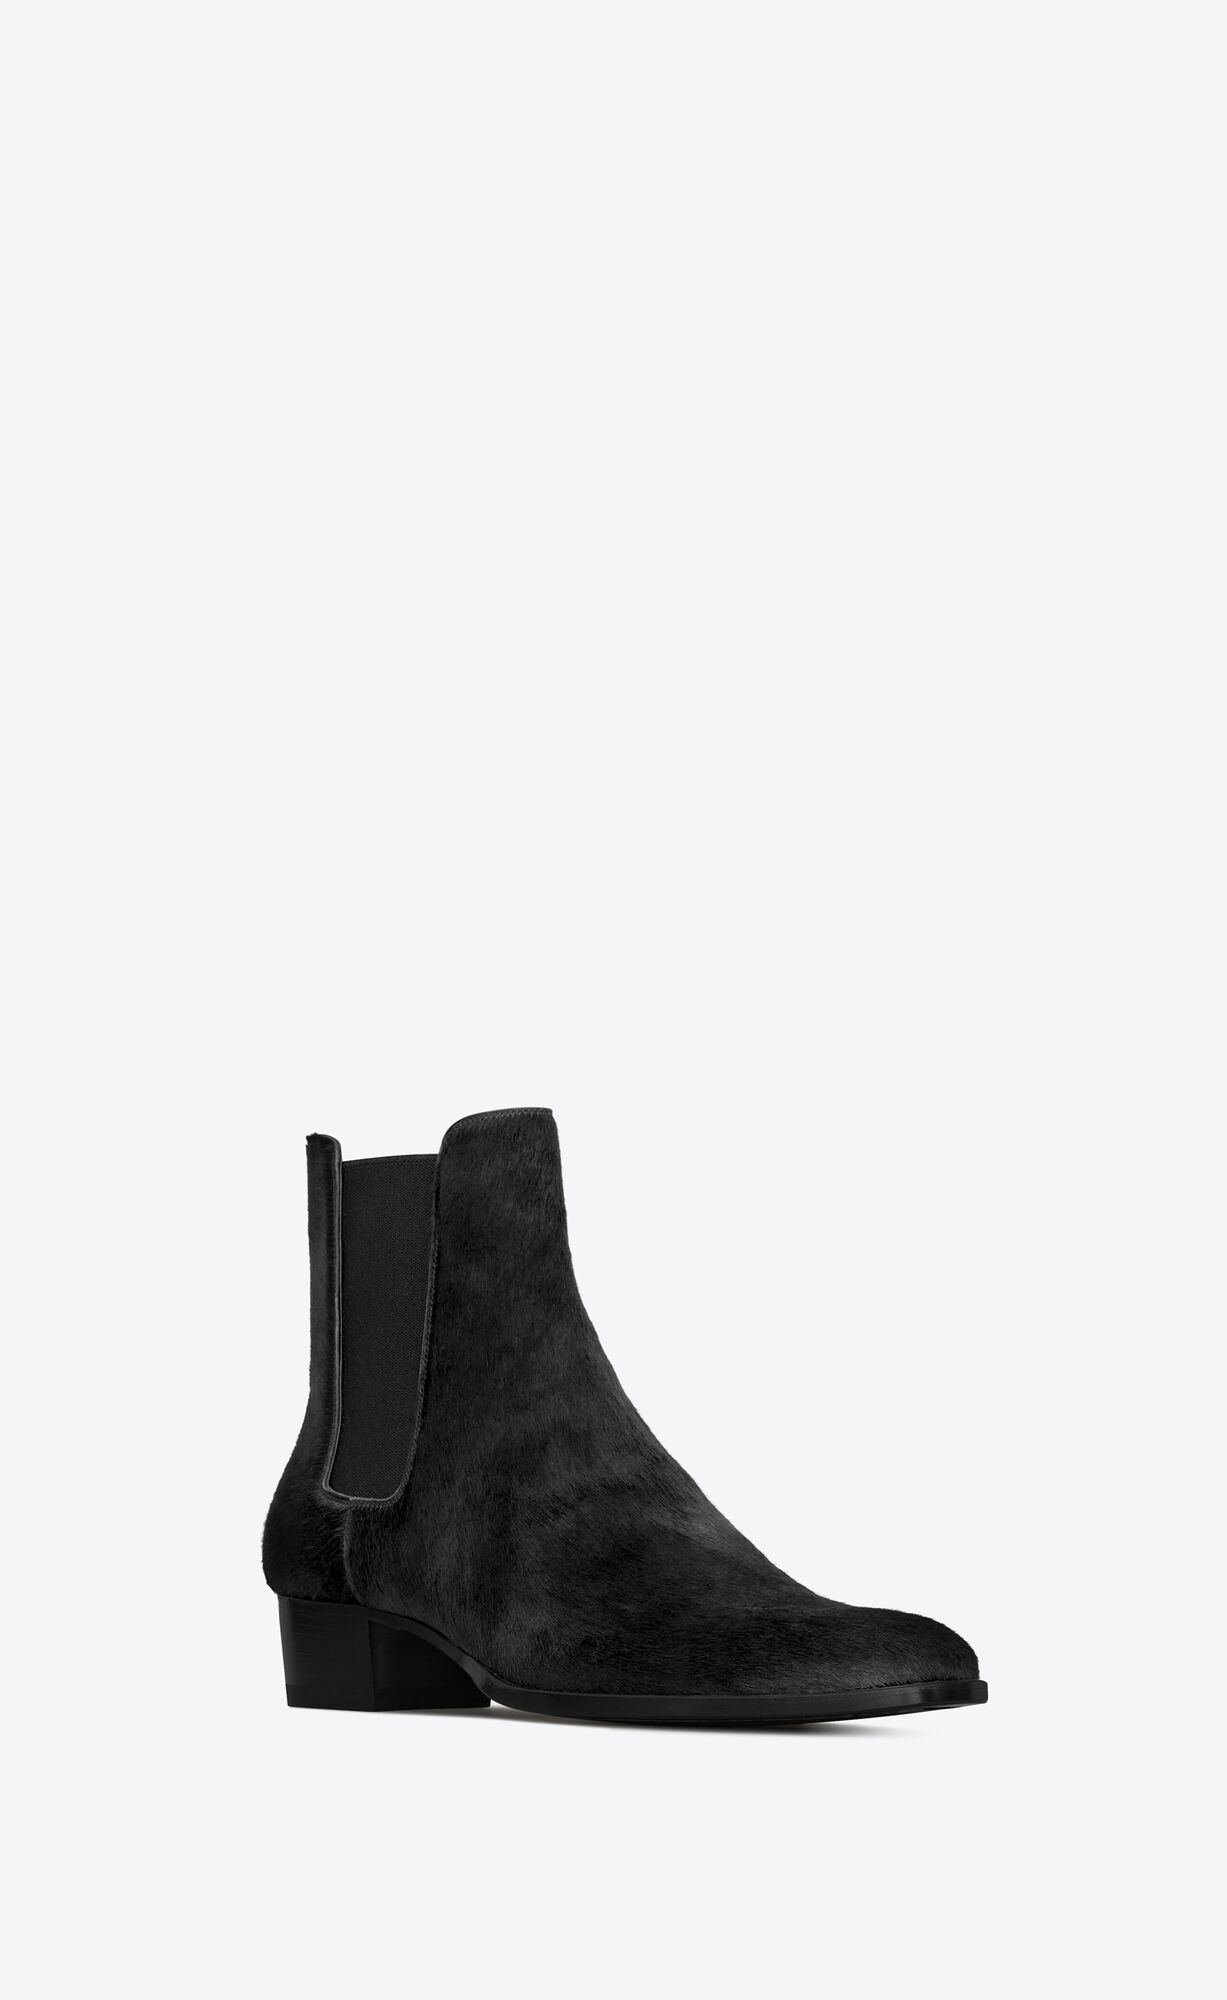 WYATT chelsea boots in pony-effect leather | Saint Laurent United ...